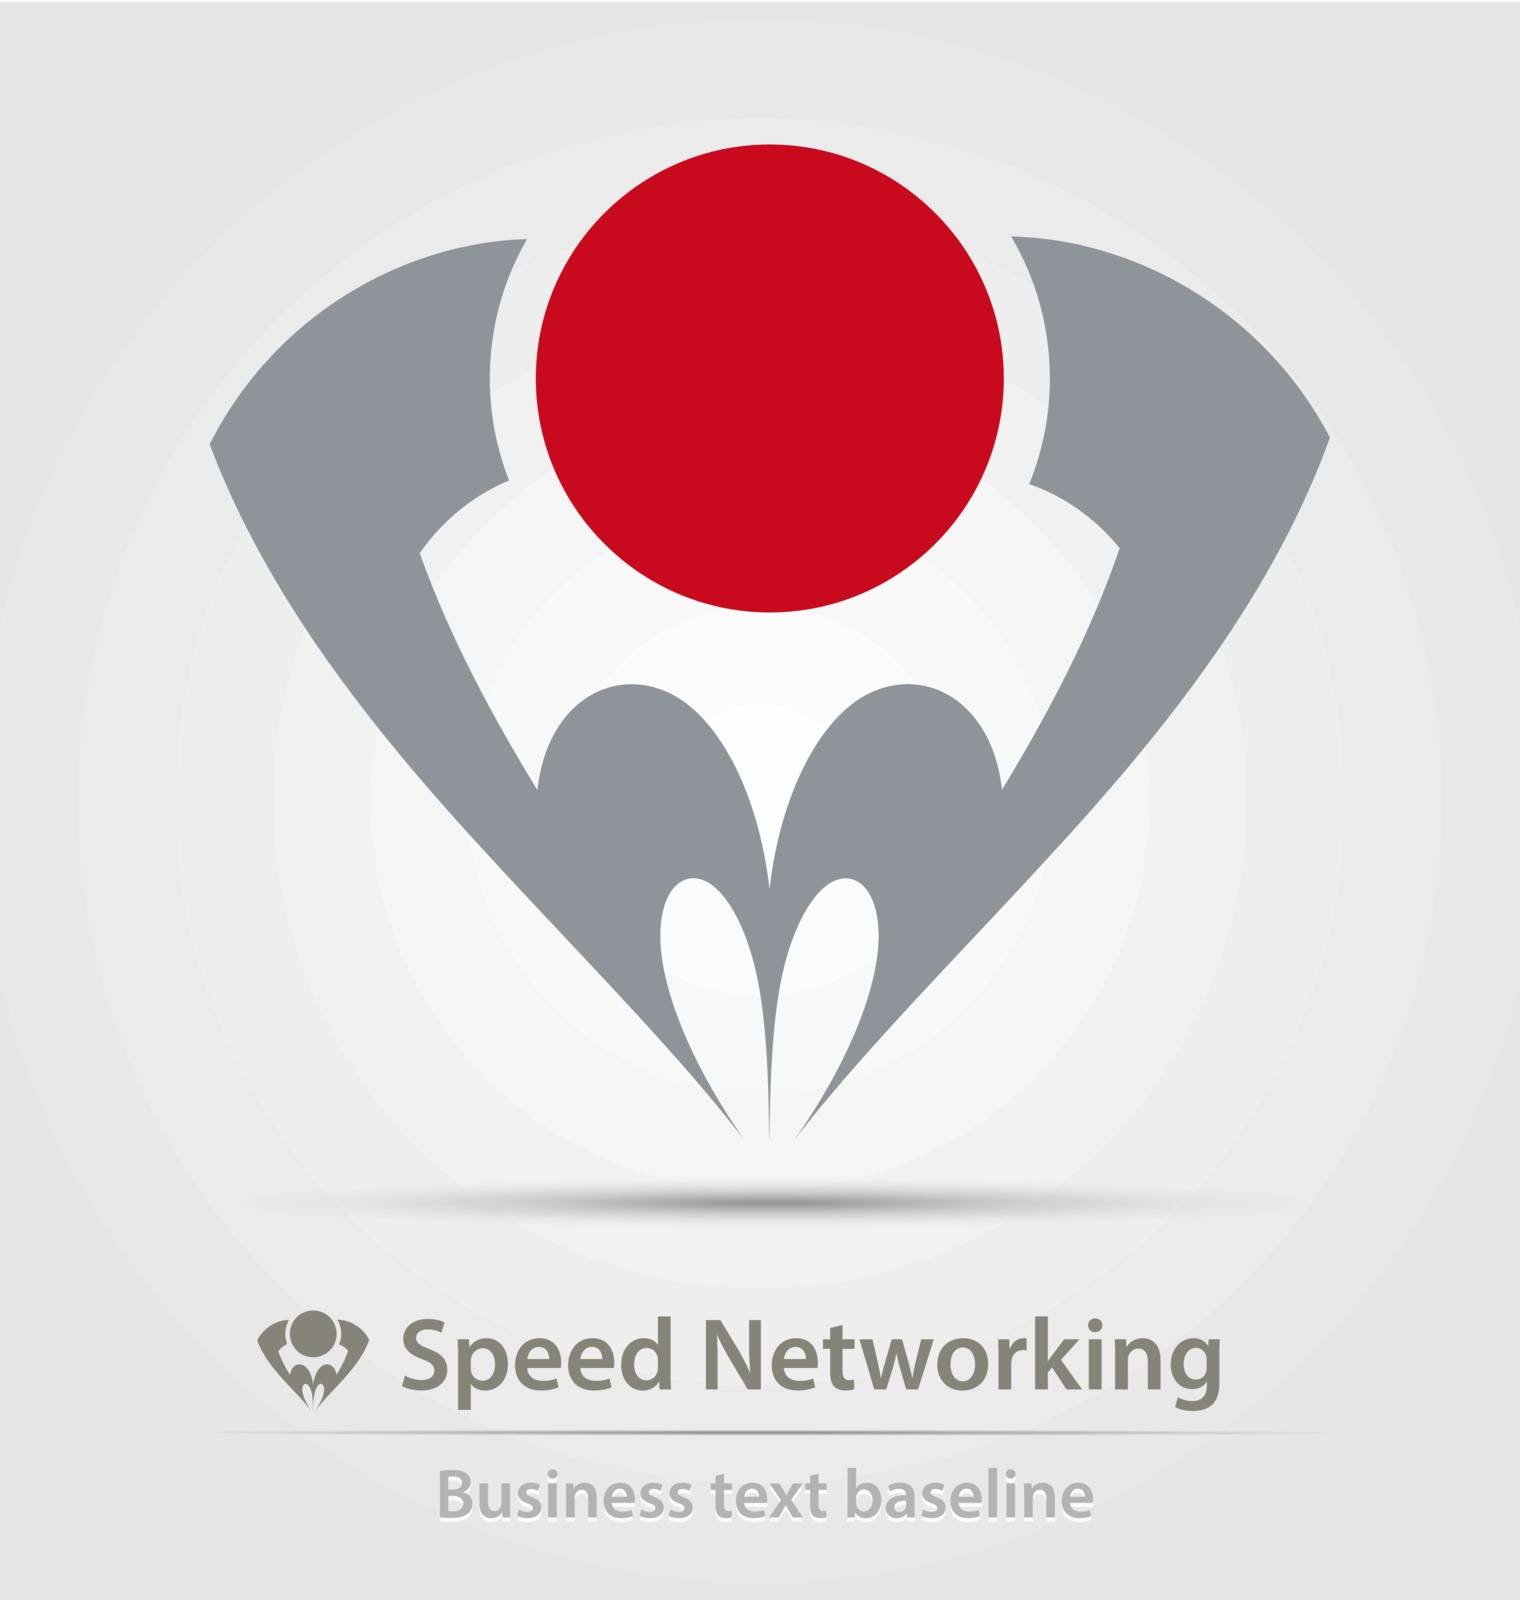 Speed networking business icon for creative design